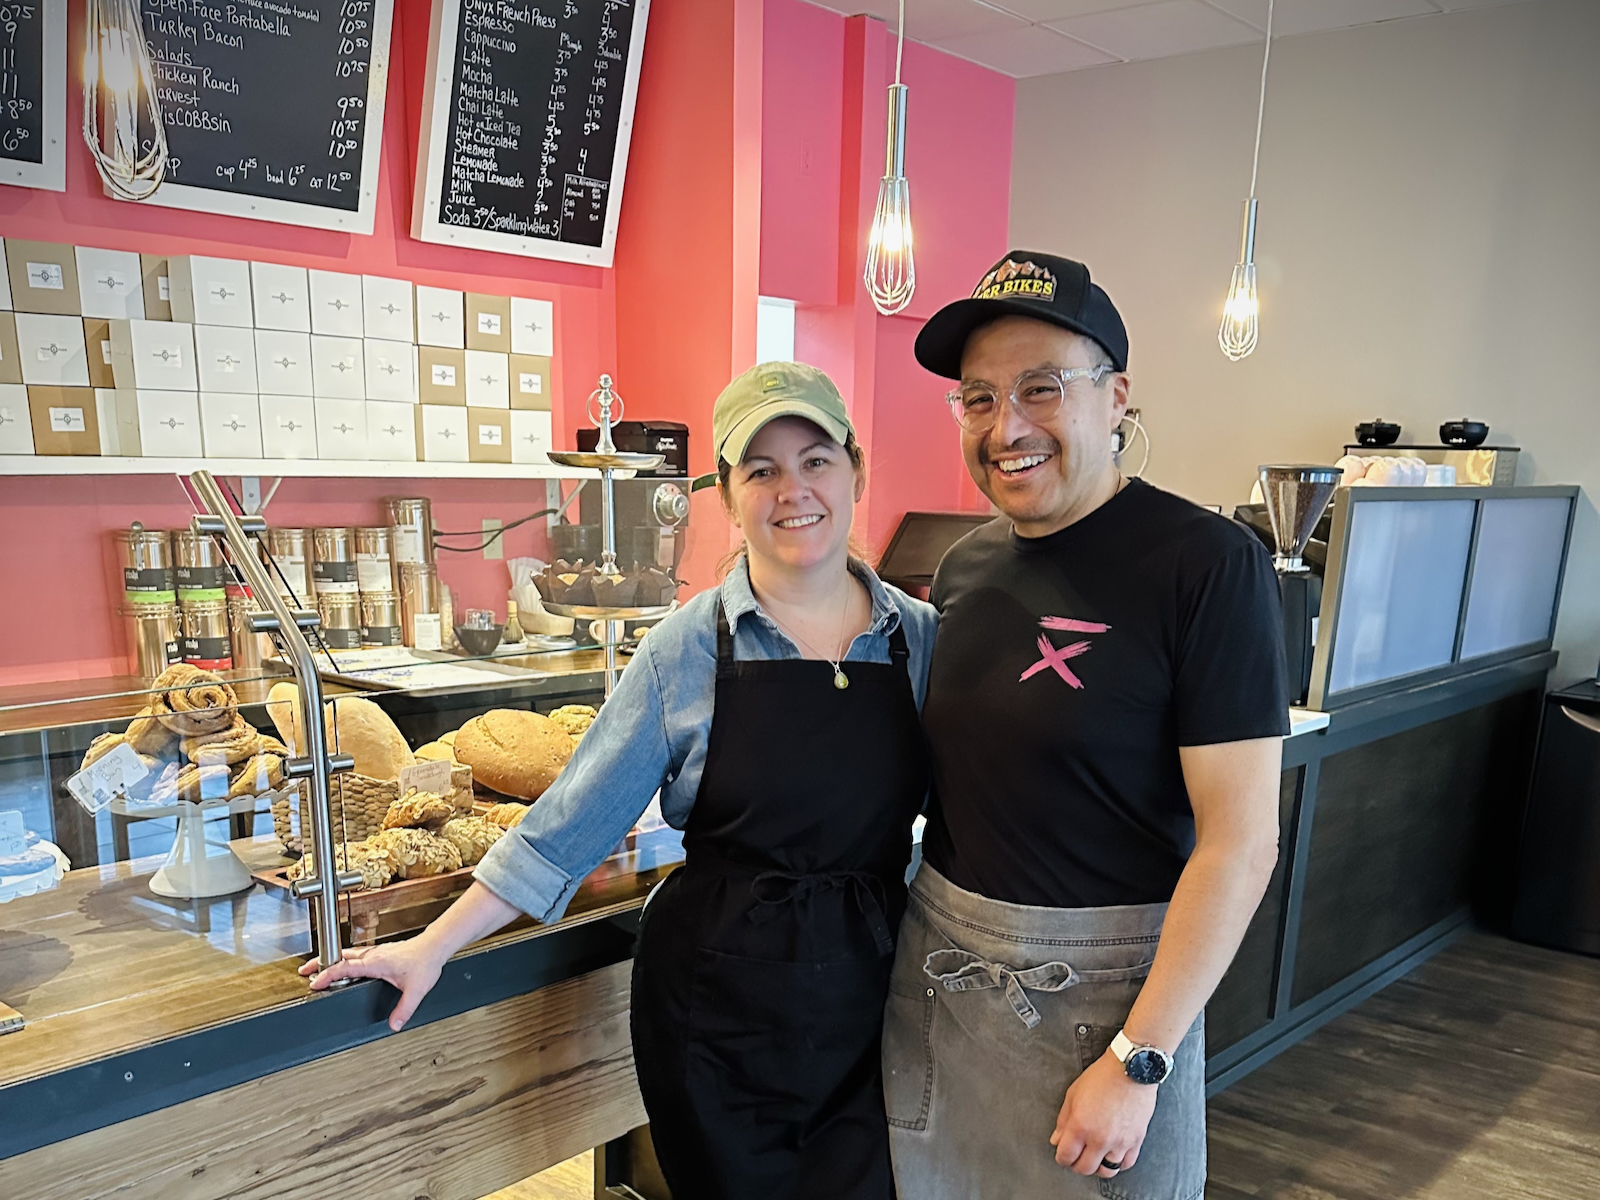  Owners of Sugar & Flour Bakery to open Casera Bakery & Cafe at R1VER campus 